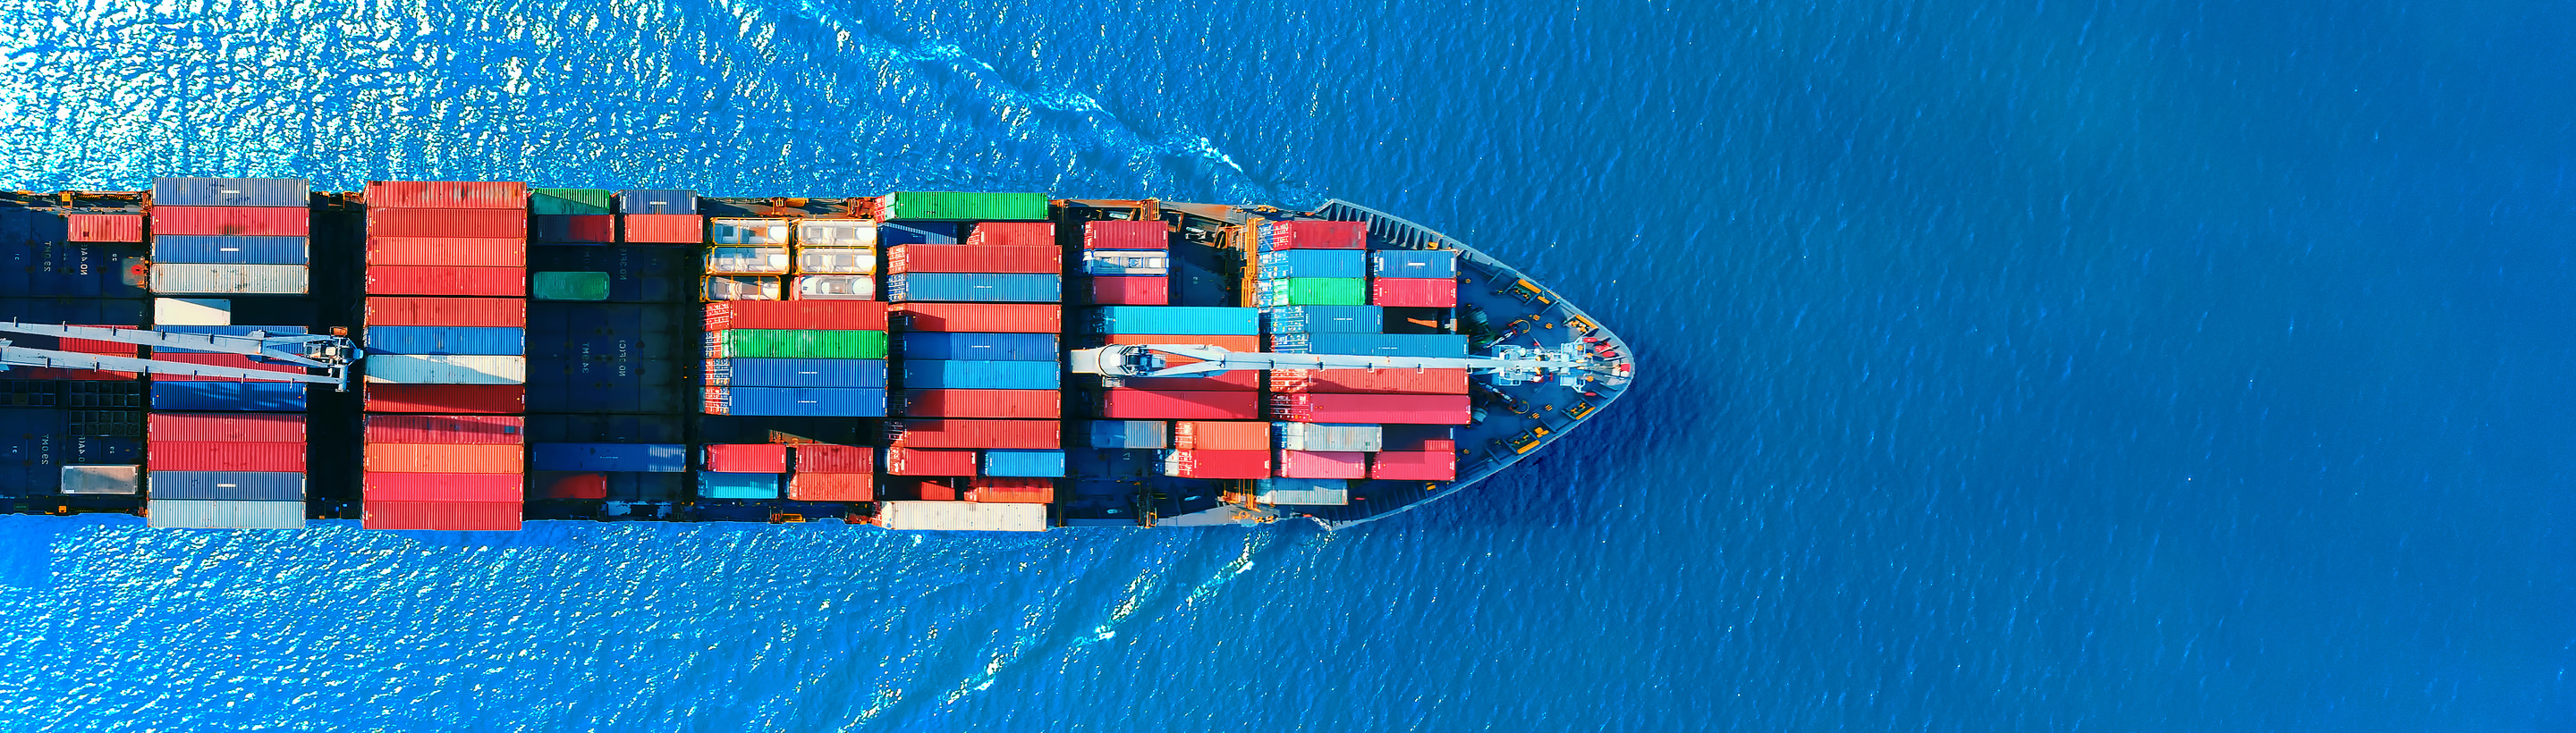 11 Ways to Reduce Your Freight Shipping Costs